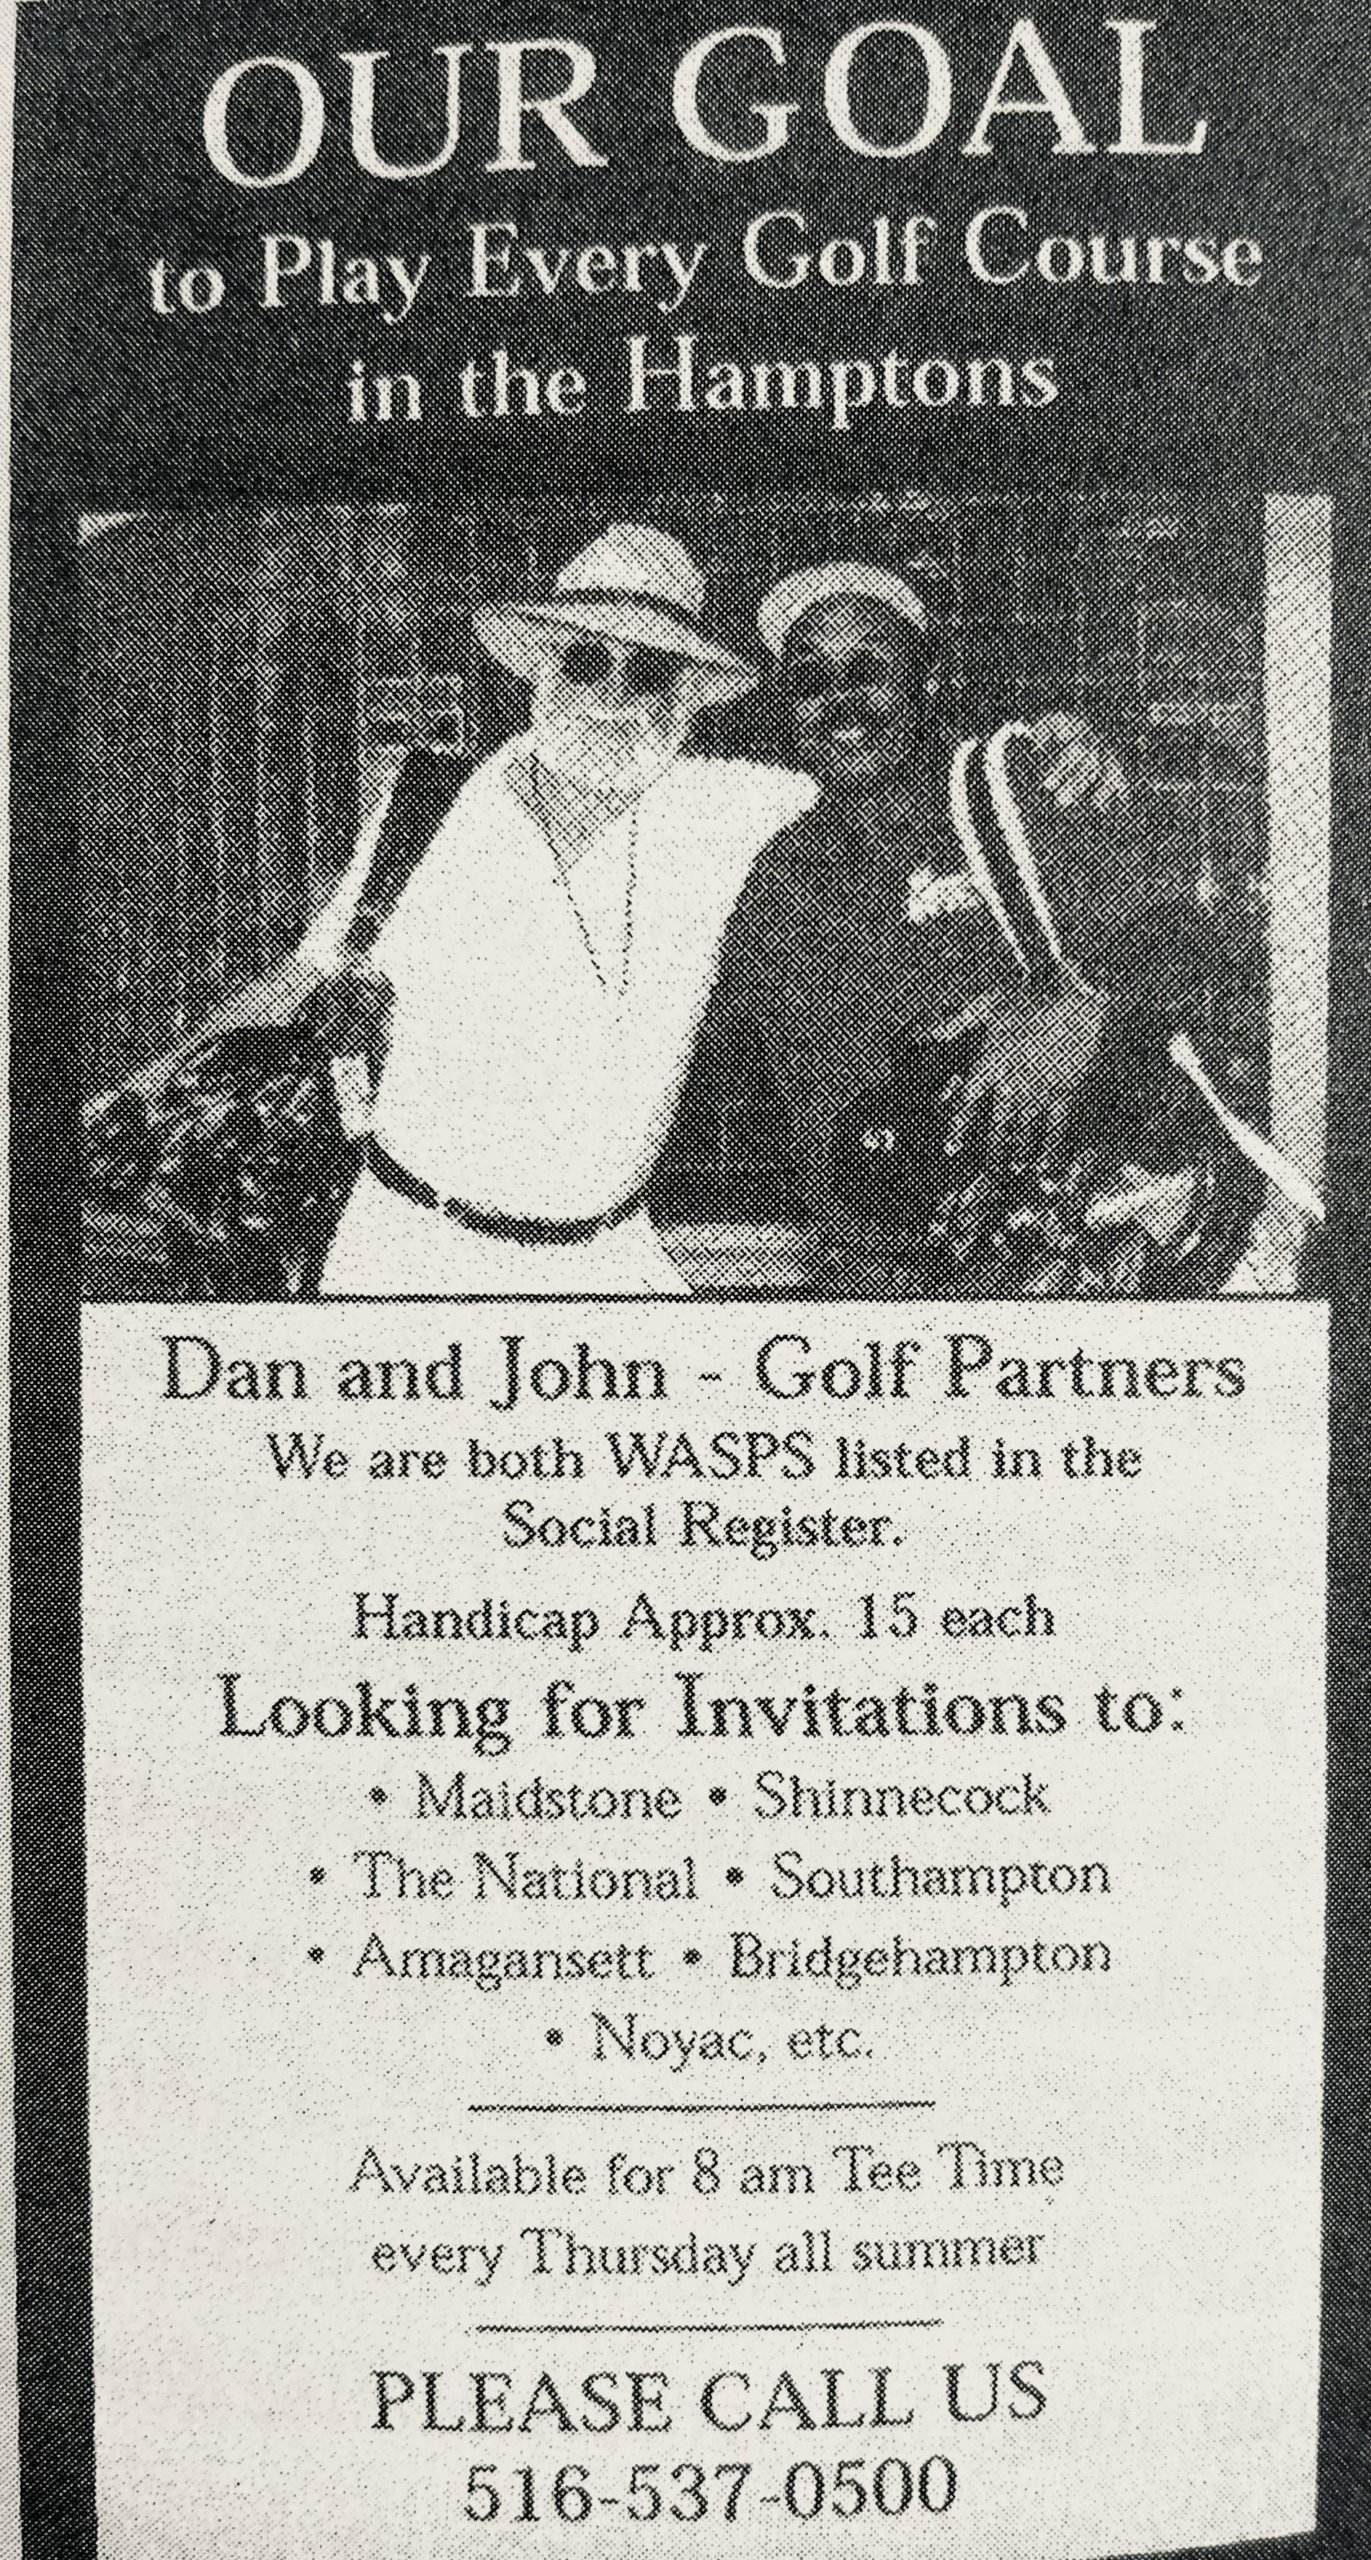 Golfers ad with Dan and John Darden